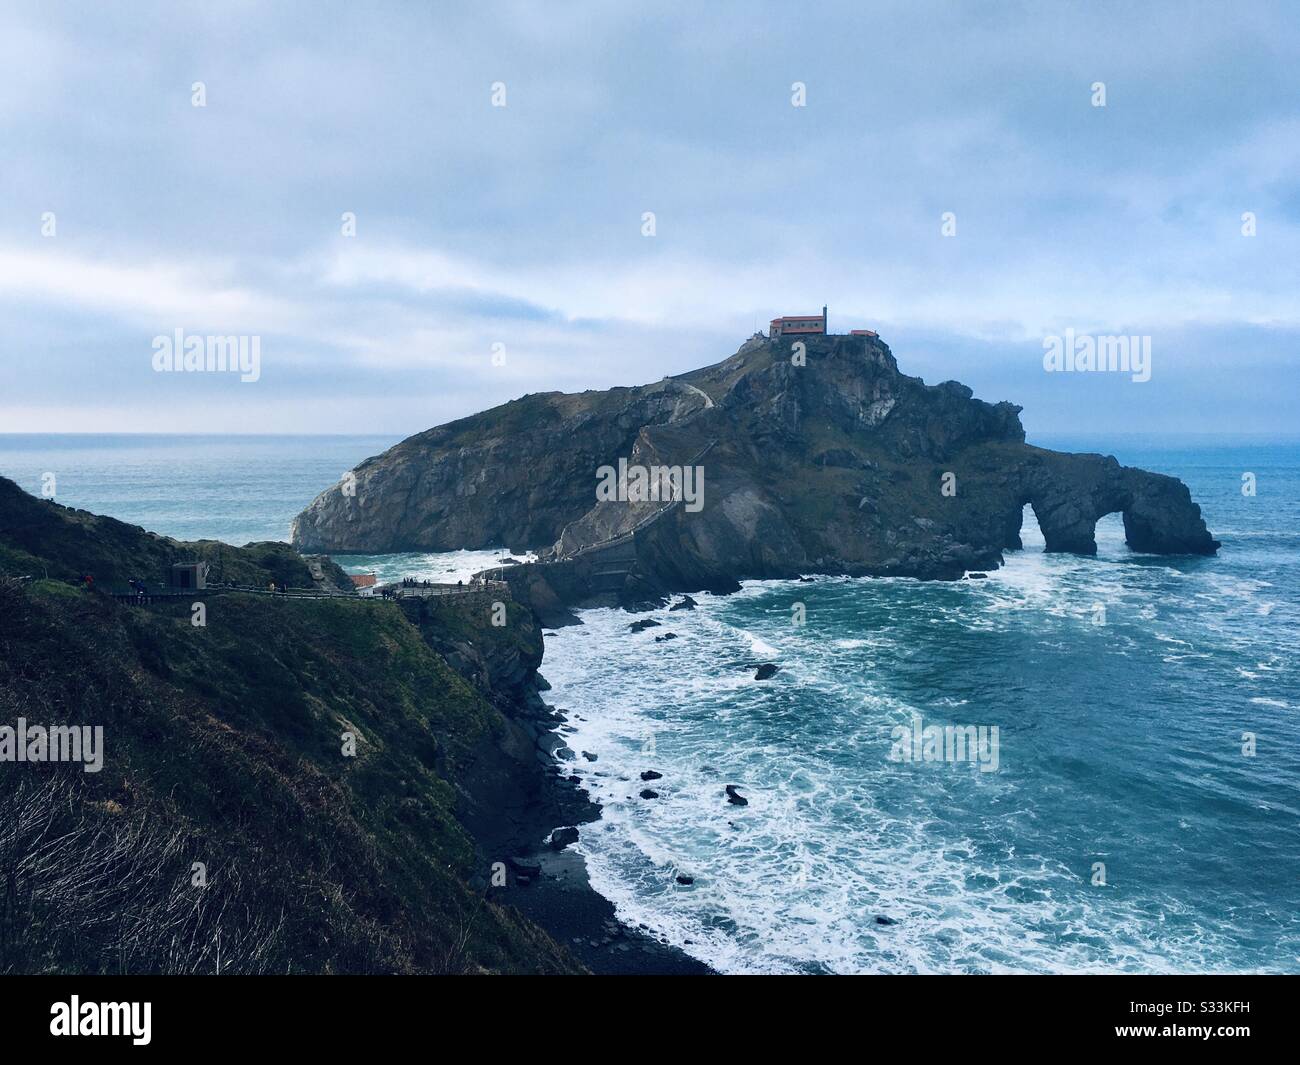 Game of Thrones Lures 75,000 Tourists to Dragonstone Steps, Potentially  Damaging Spanish Pilgrimage Site